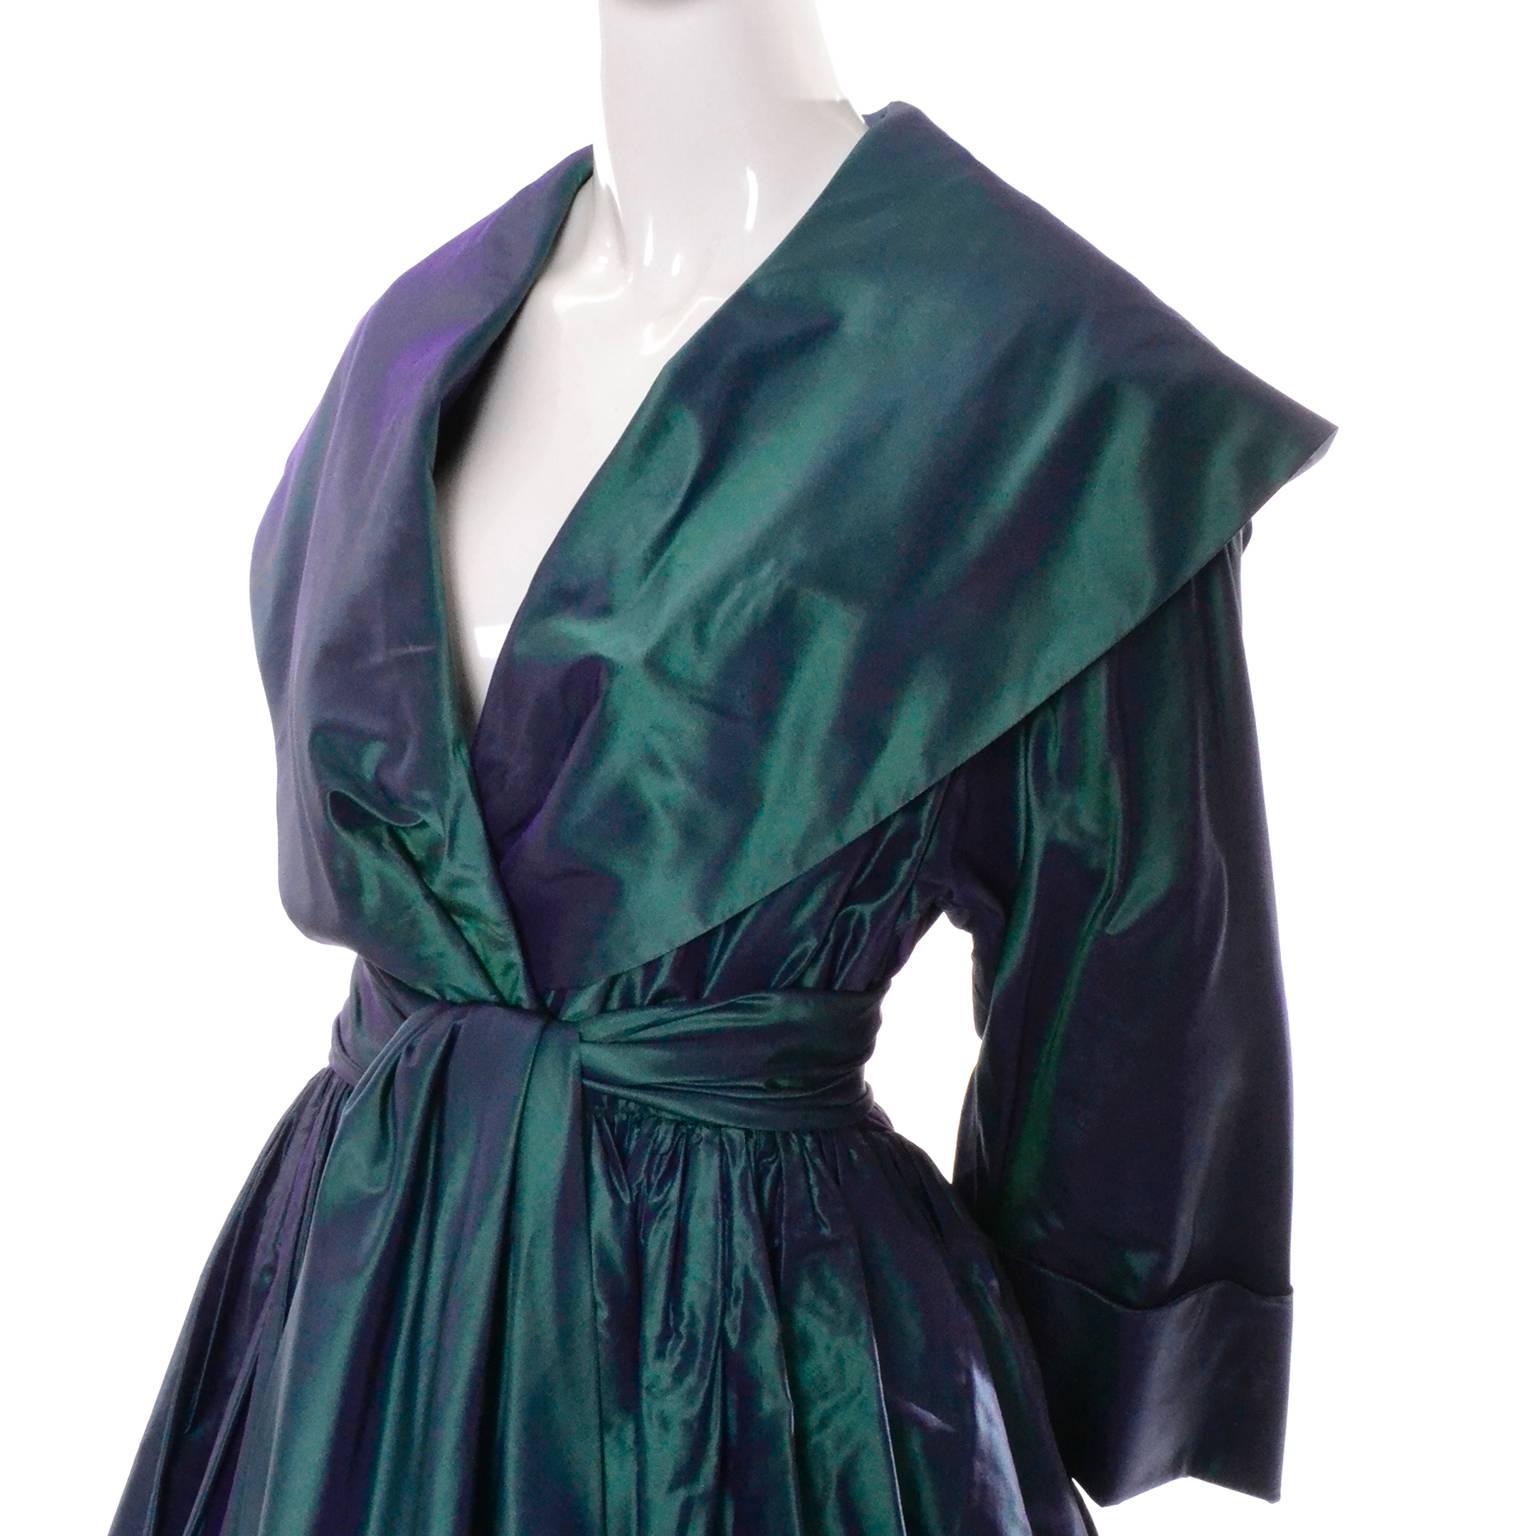 This stunning vintage evening gown was designed by Carolyne Roehm and purchased at Bergdorf Goodman in the 1980's.  This iridescent peacock blue / green dress is made of a gorgeous taffeta and closes at the waist with a snap and hook and eye.  There